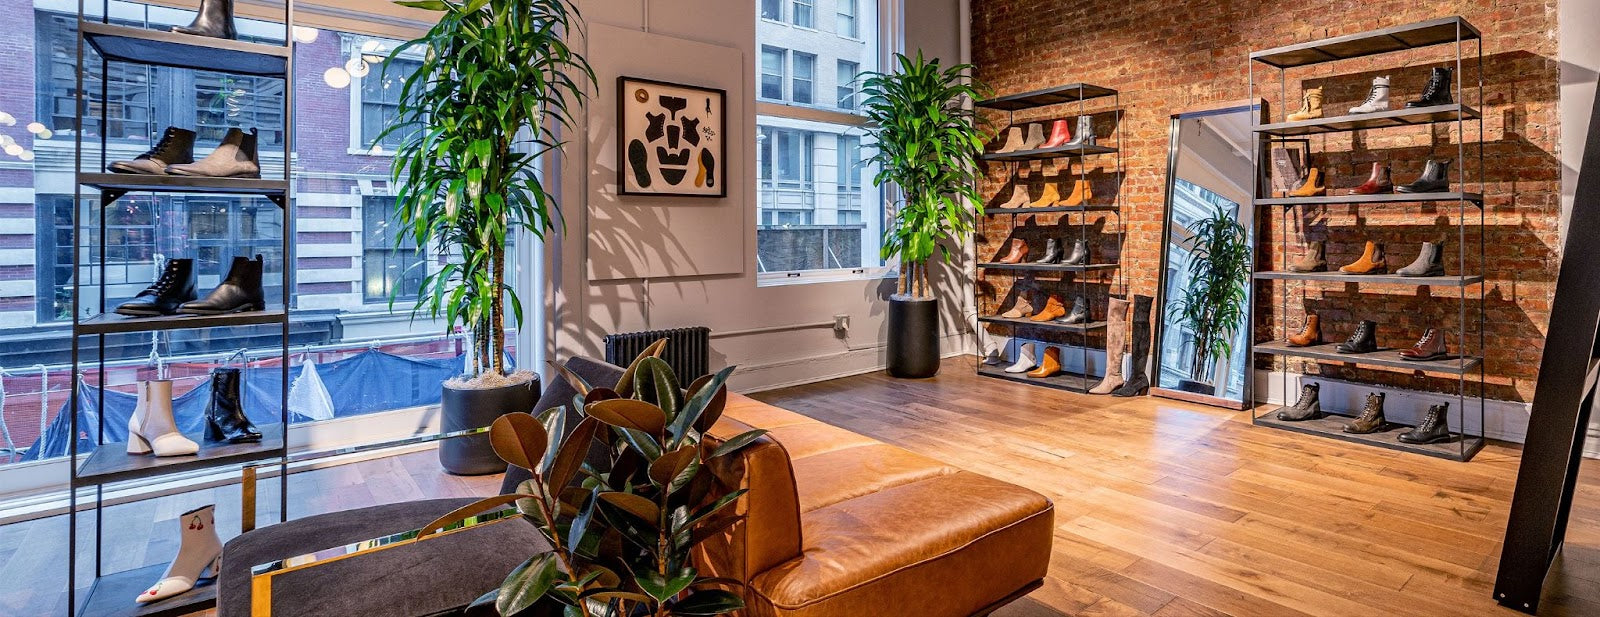 Thursday Boots's brick-and-mortar shop uses identical shelving units to create a sense of balance.